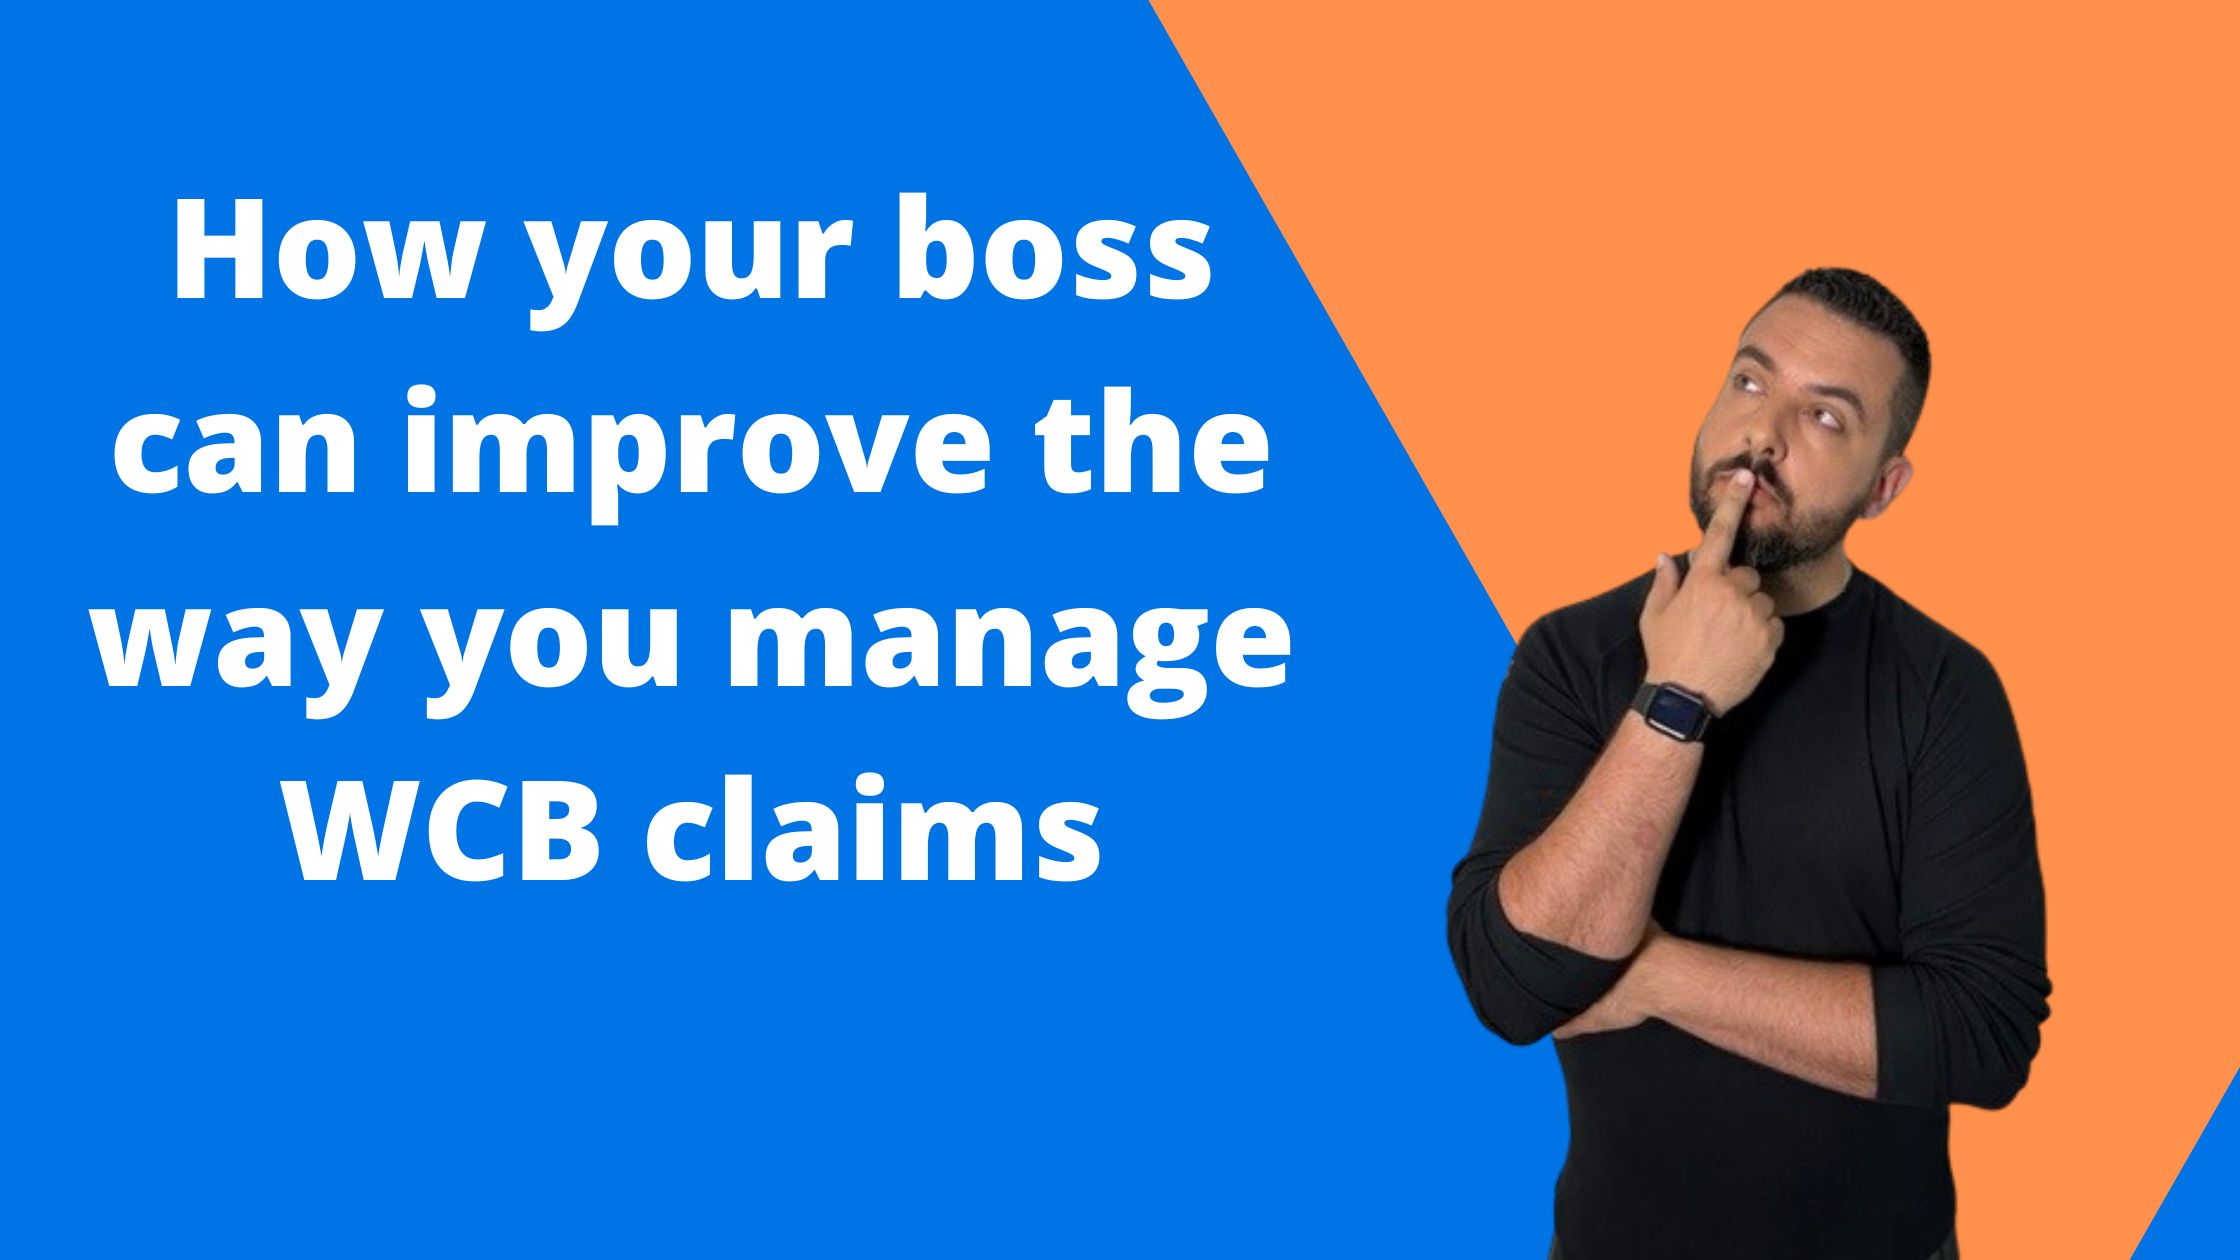 Why You Can’t Manage WCB Claims Using Fear